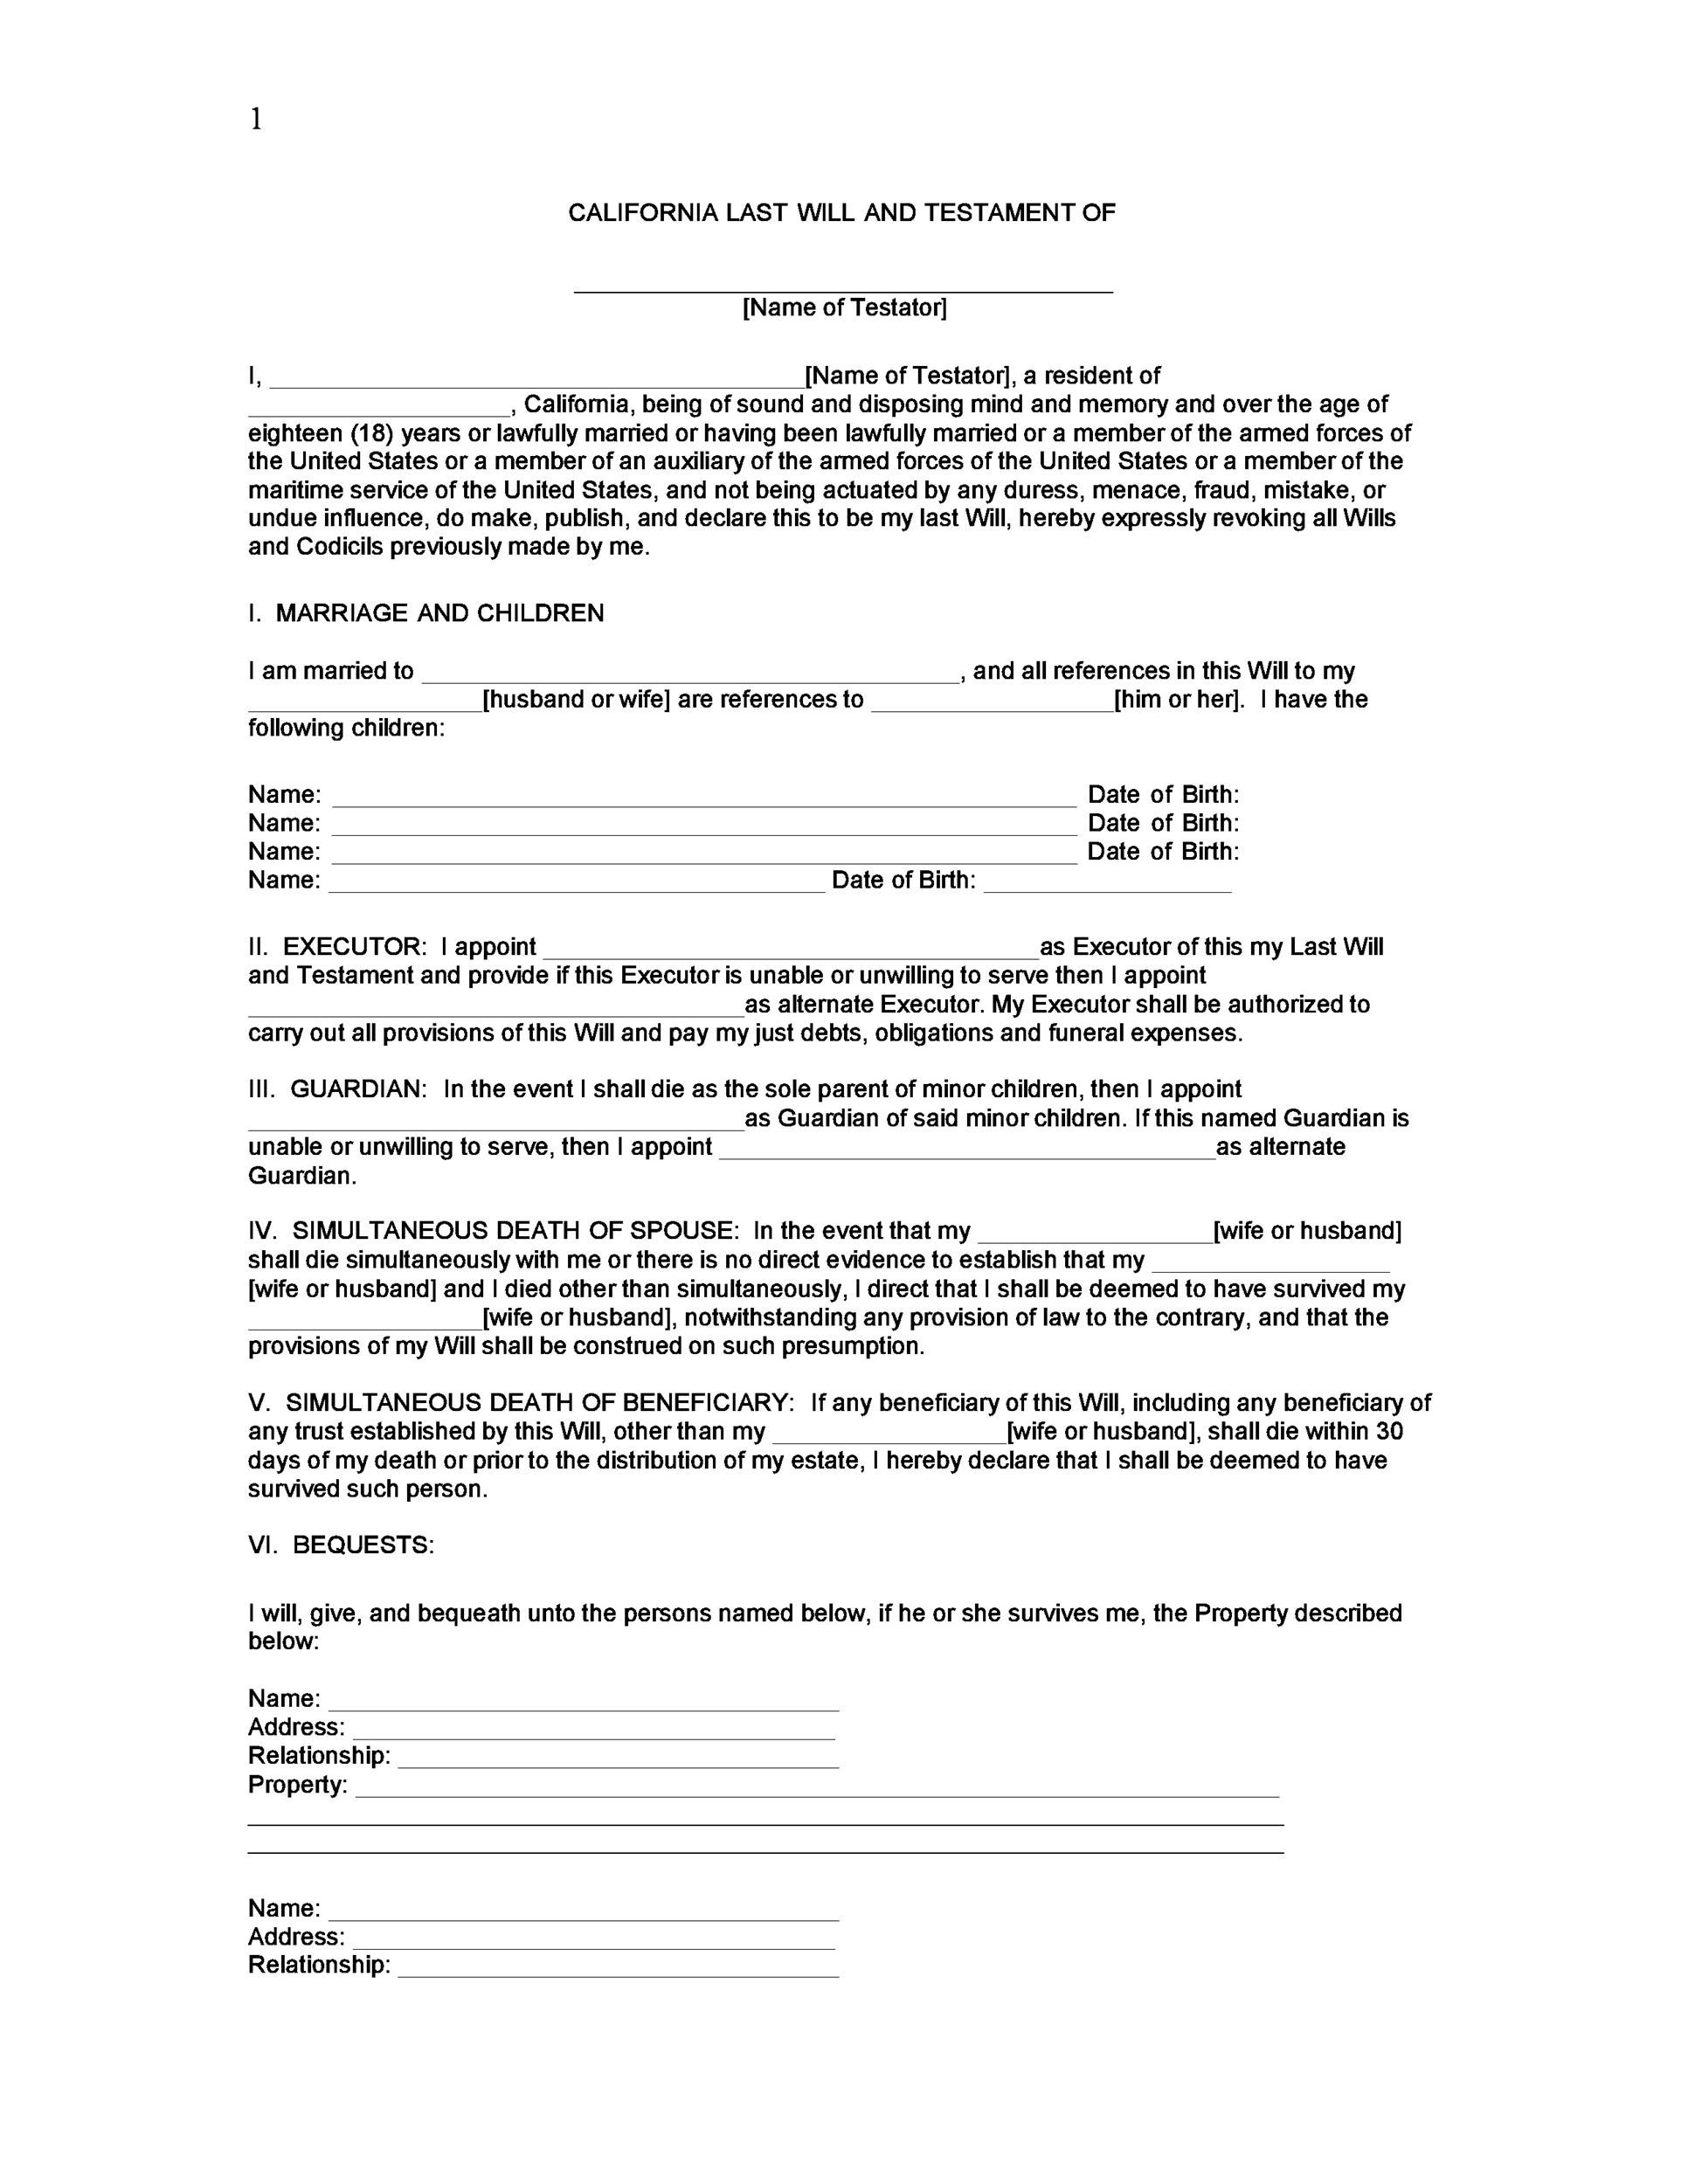 my last will and testament free download